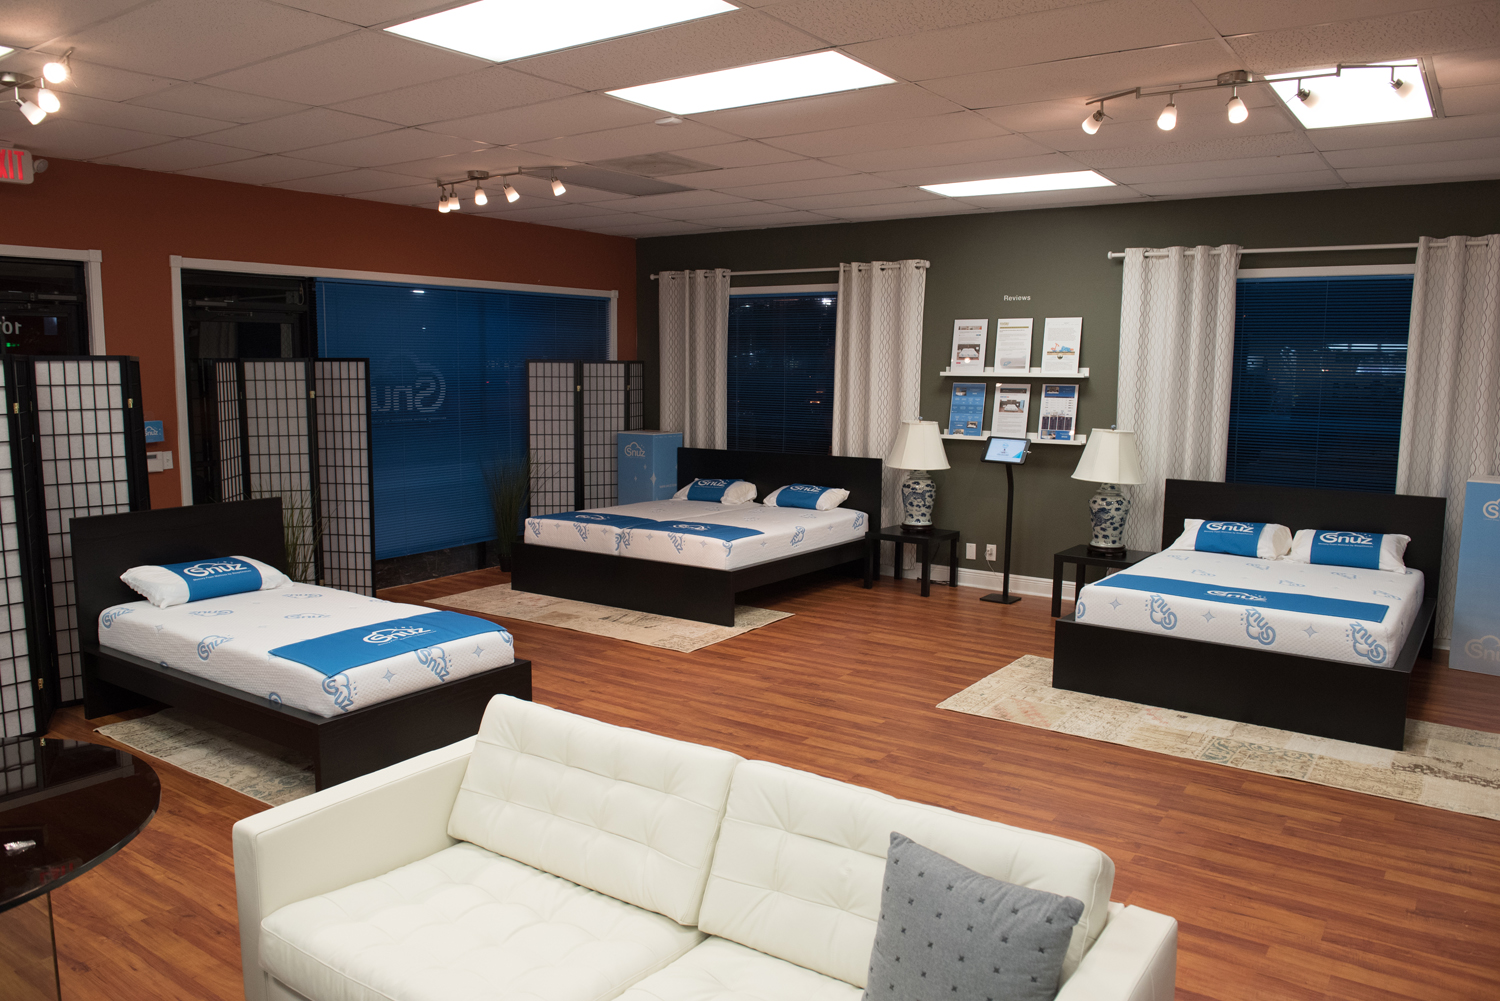 Mattress Showroom Holding Grand Opening and Auction to Benefit Marjory Stoneman Douglas